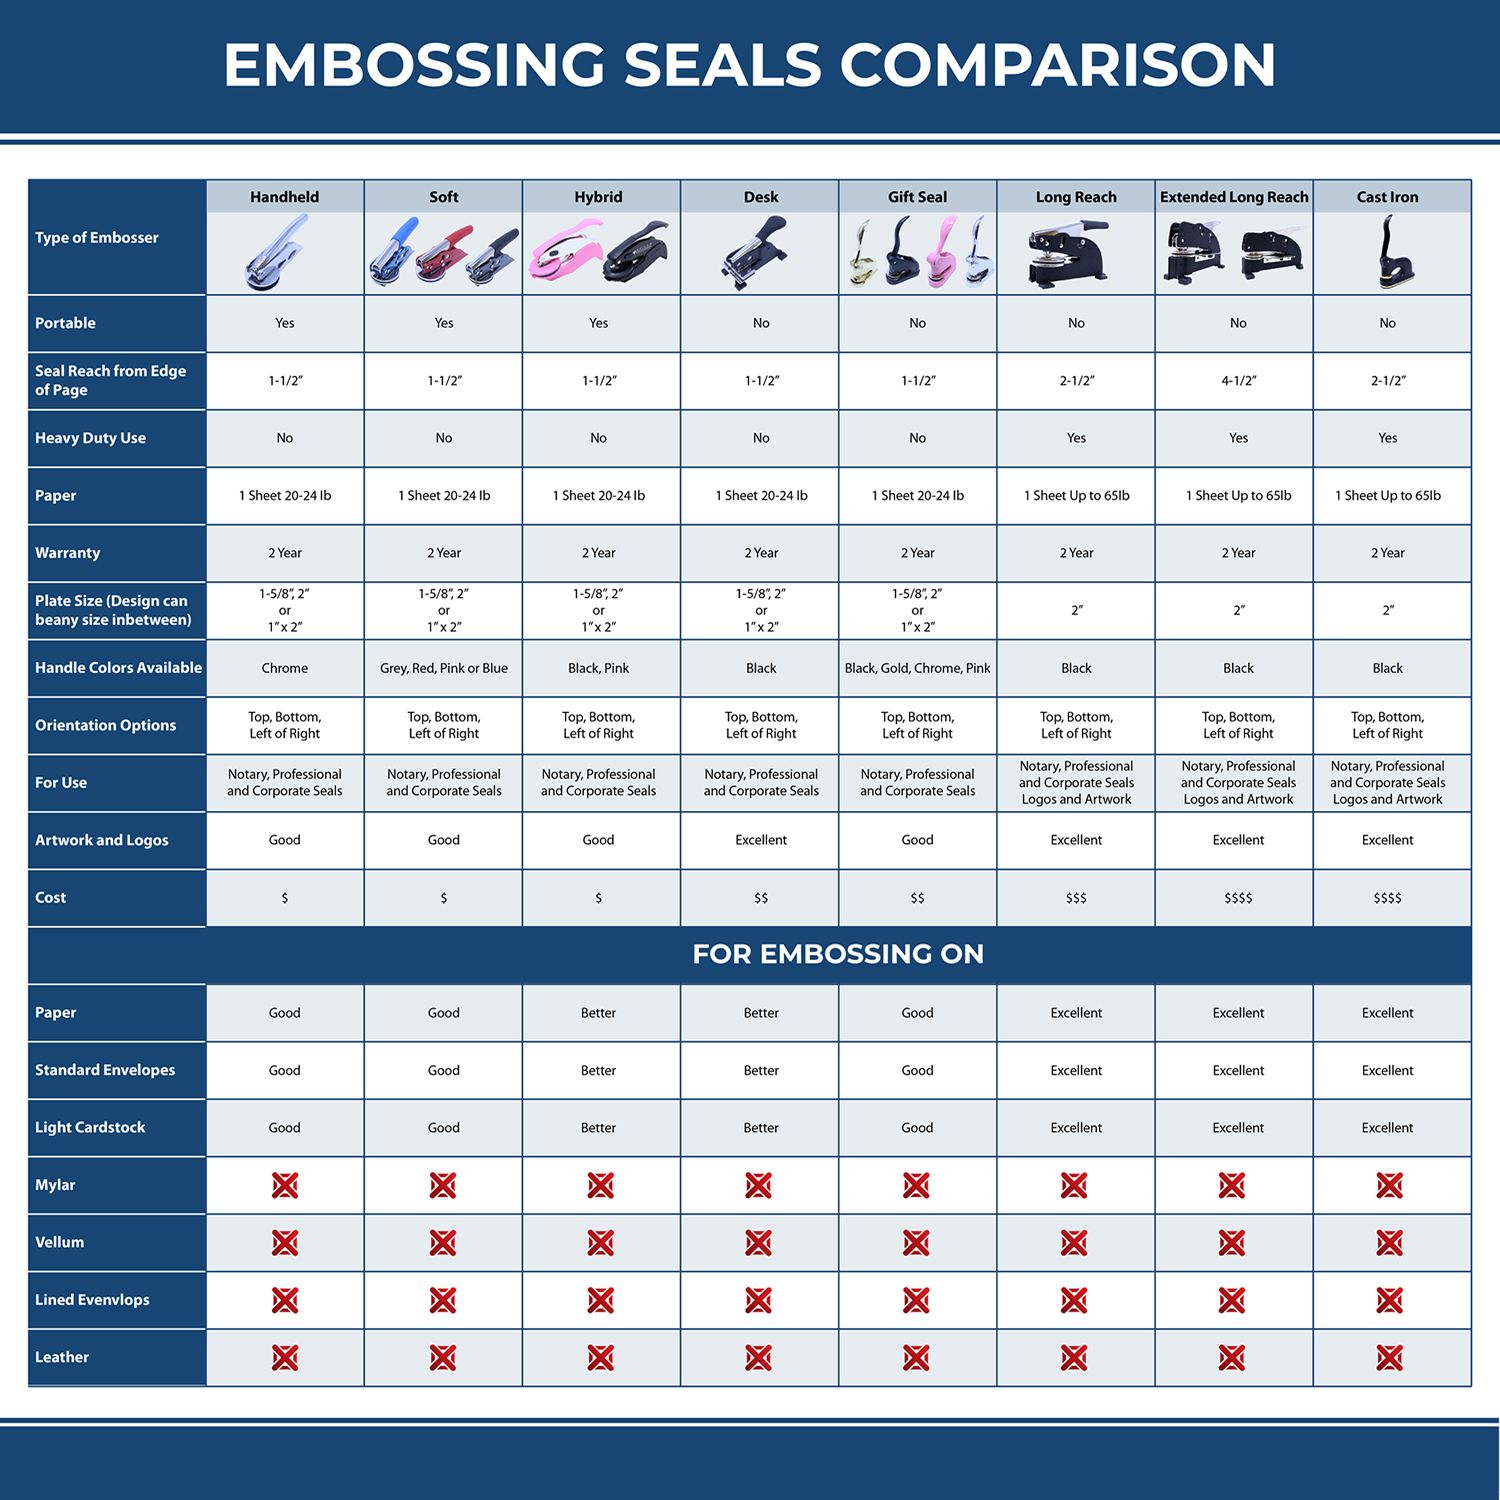 A comparison chart for the different types of mount models available for the Extended Long Reach North Carolina Architect Seal Embosser.